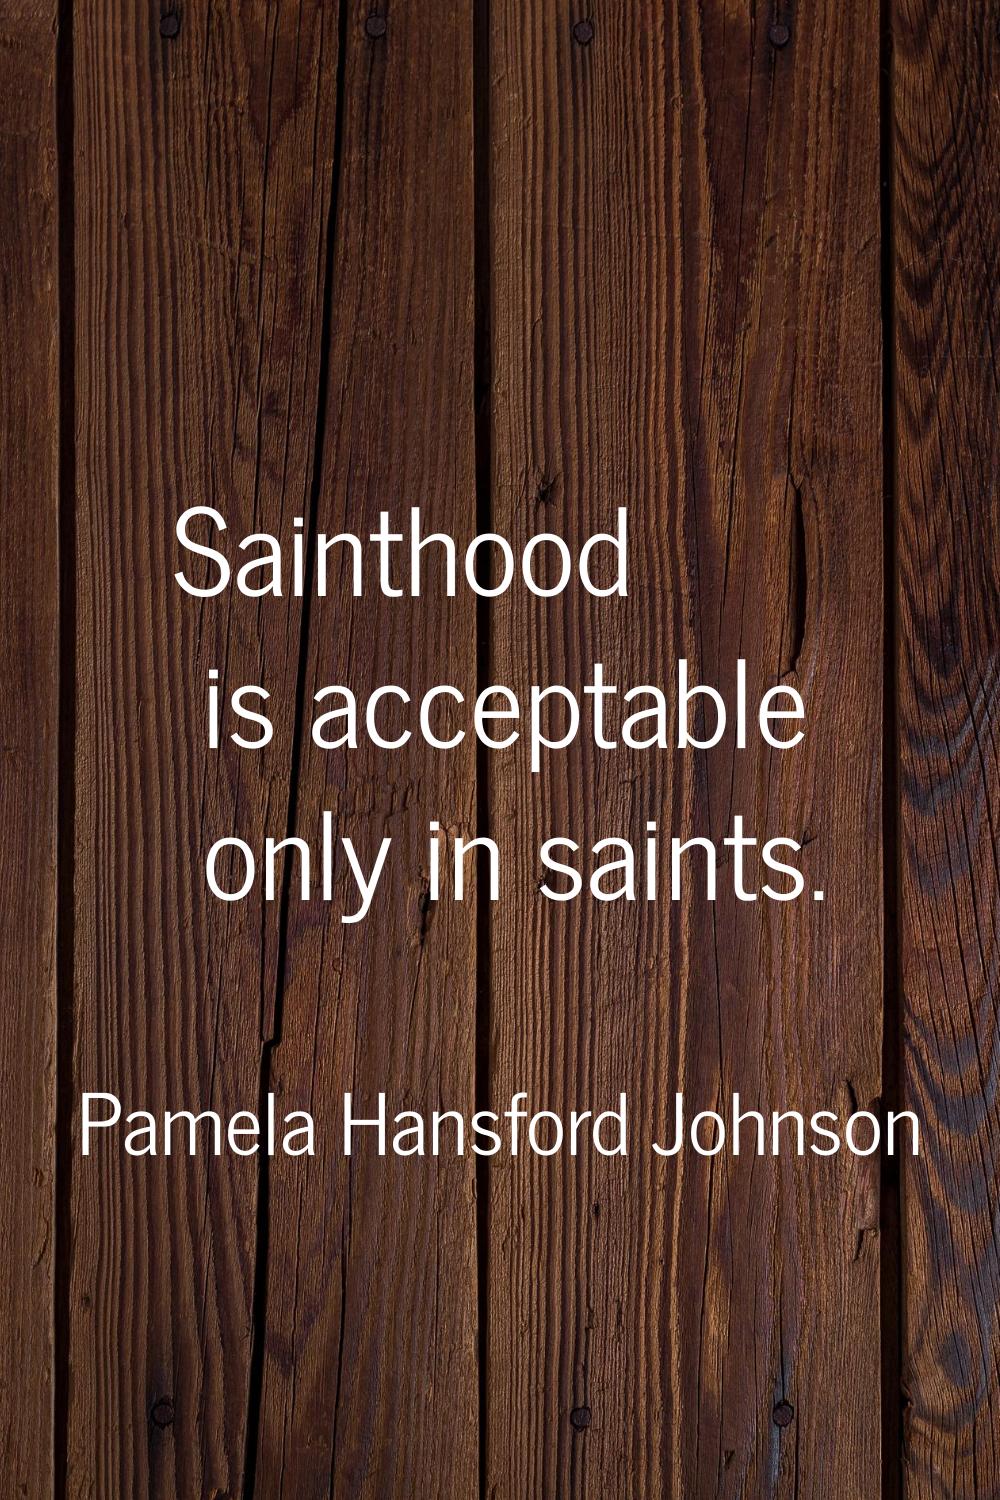 Sainthood is acceptable only in saints.